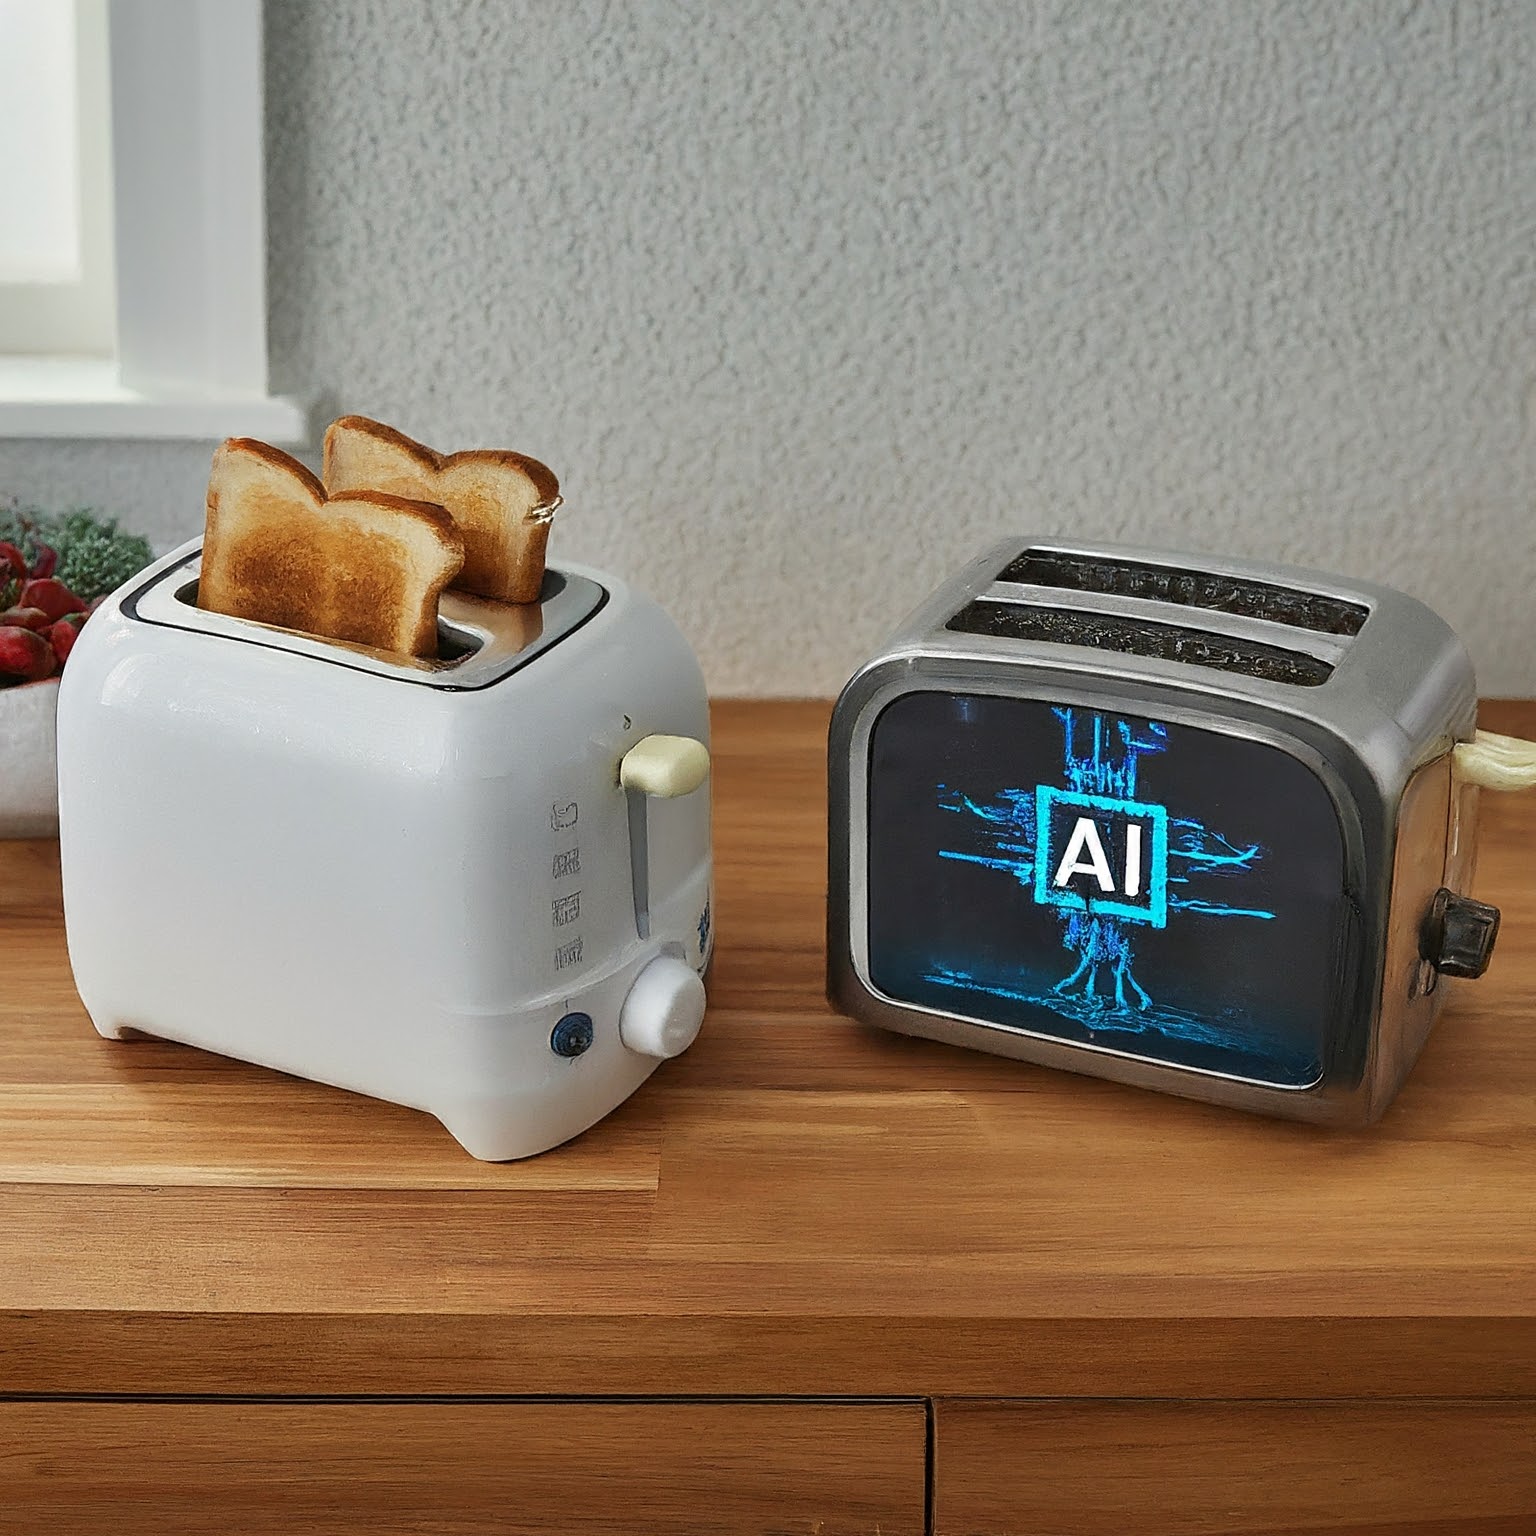 The Shocking Truth About Tiny AI: Why Your Toaster Could Soon Outsmart You (But Don’t Panic!)